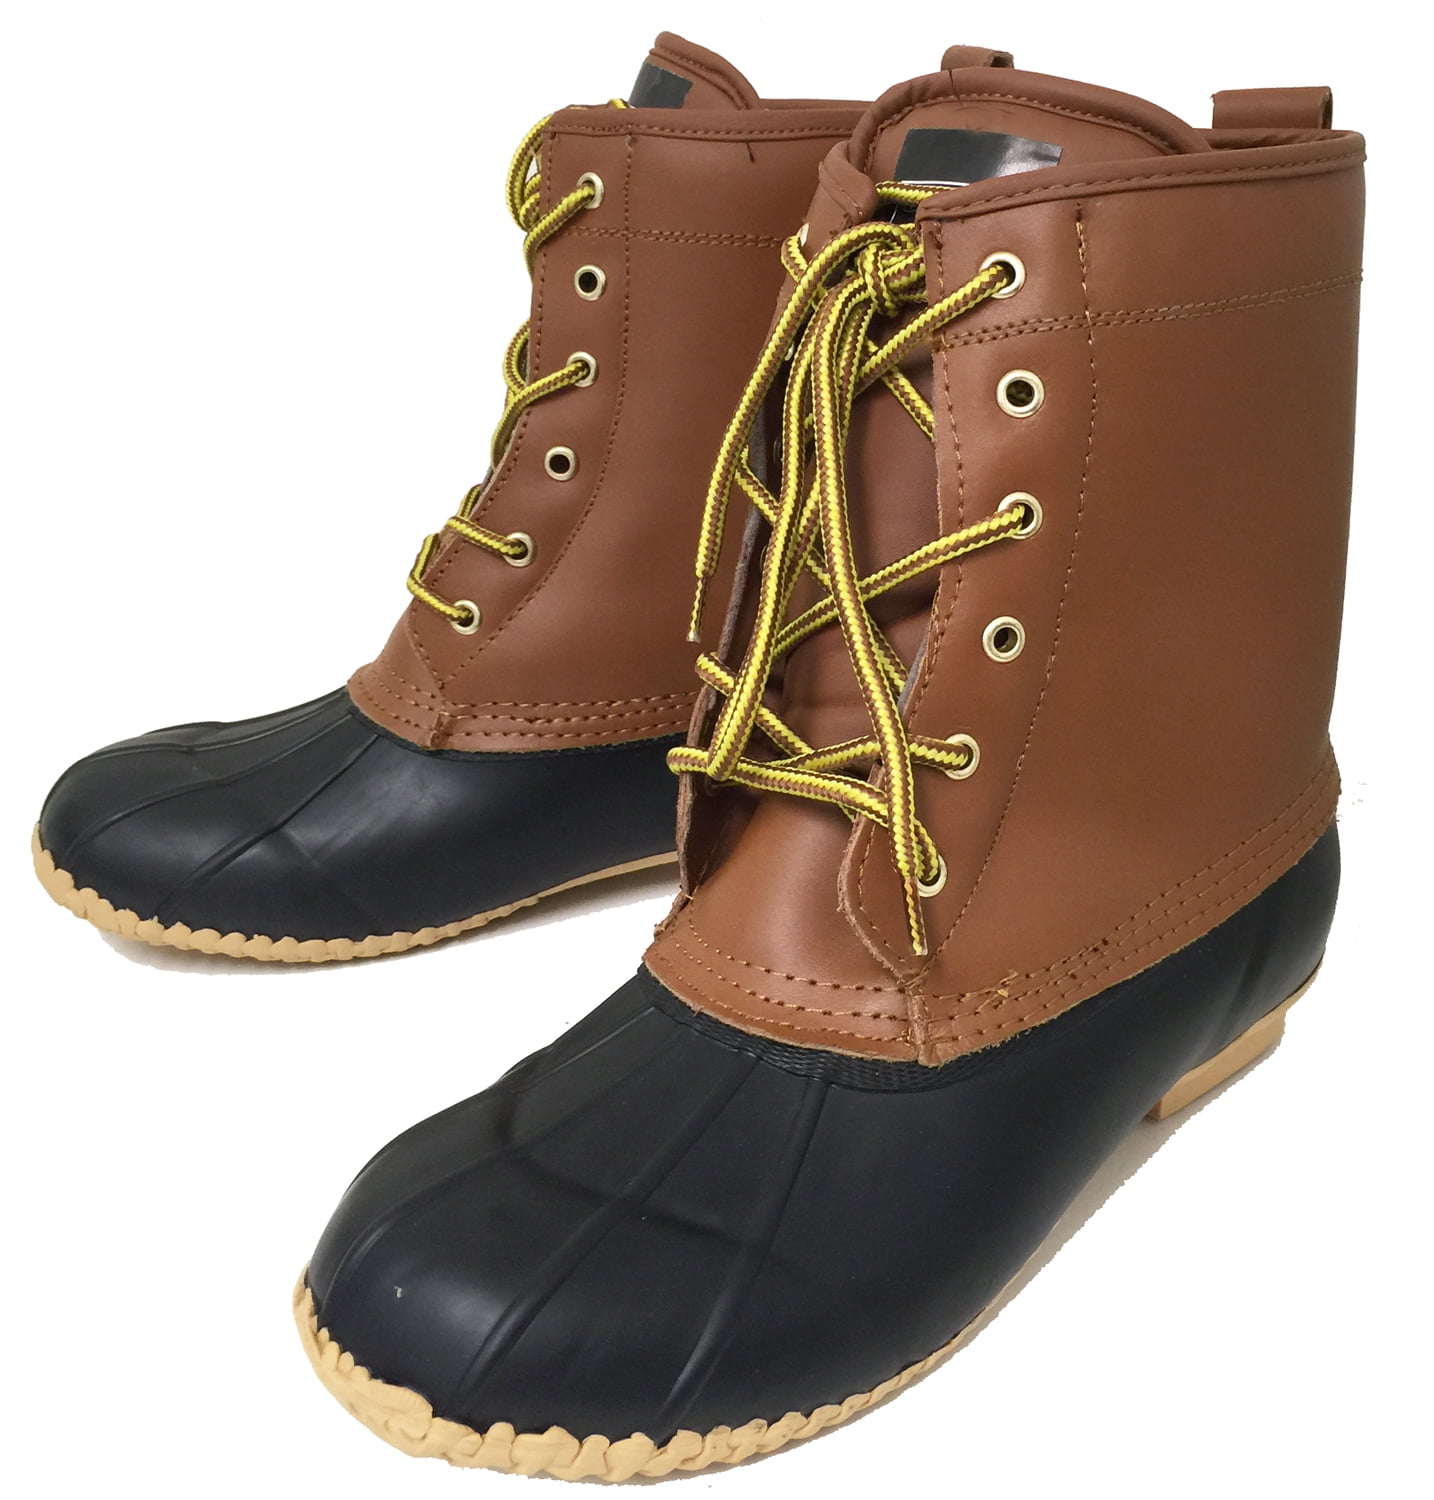 Men's Boots Leather Insulated Eyelet Duck Snow Shoes - Walmart.com